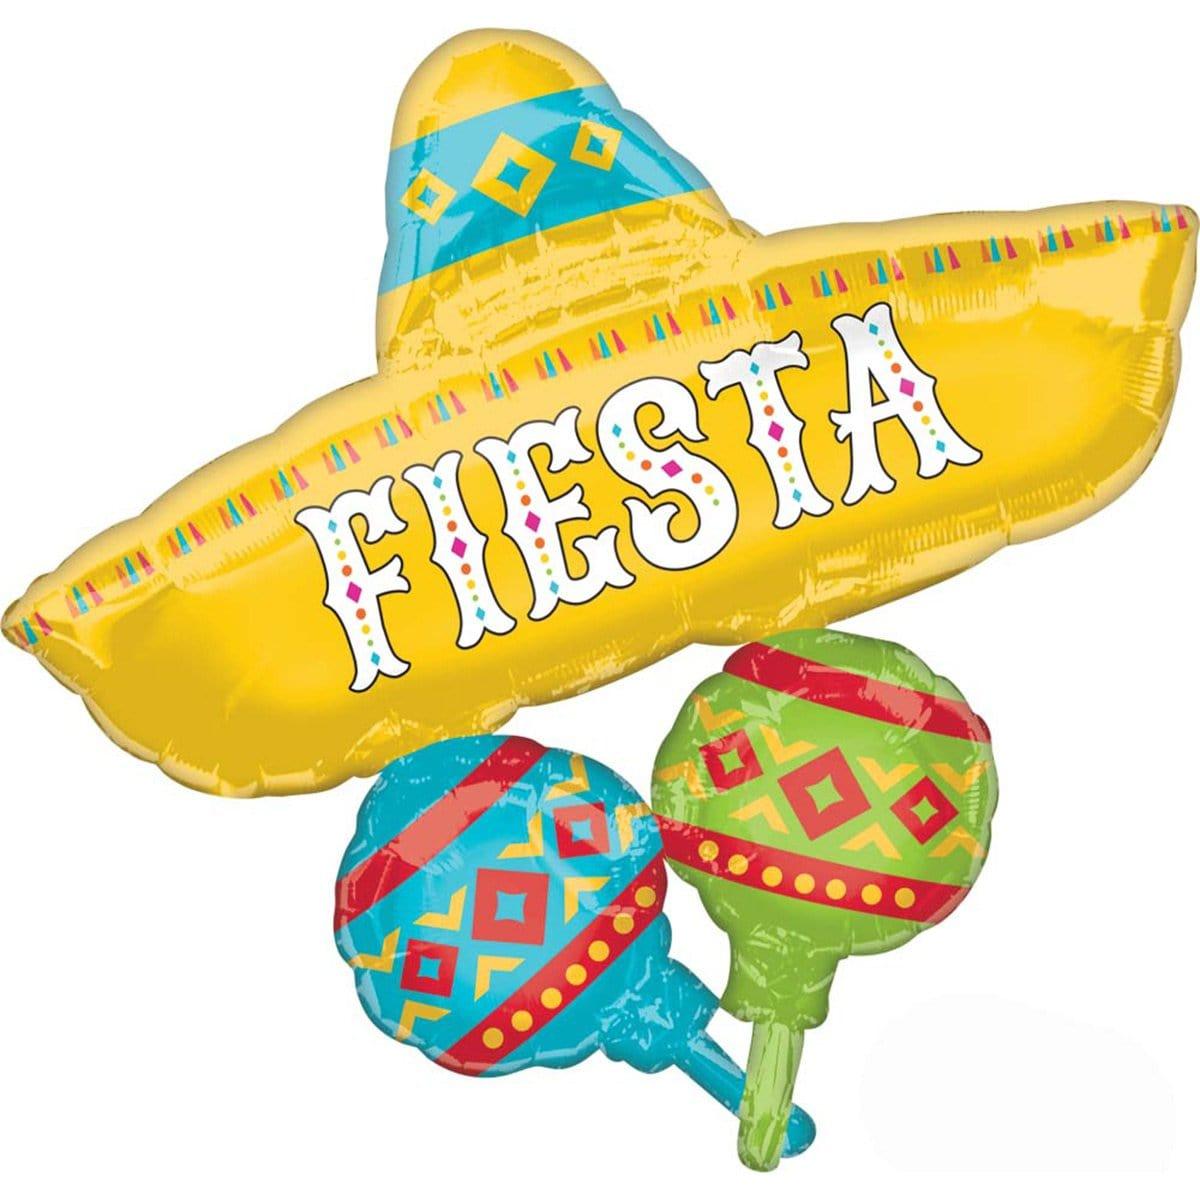 Buy Balloons Fiesta Supershape Foil Balloon sold at Party Expert